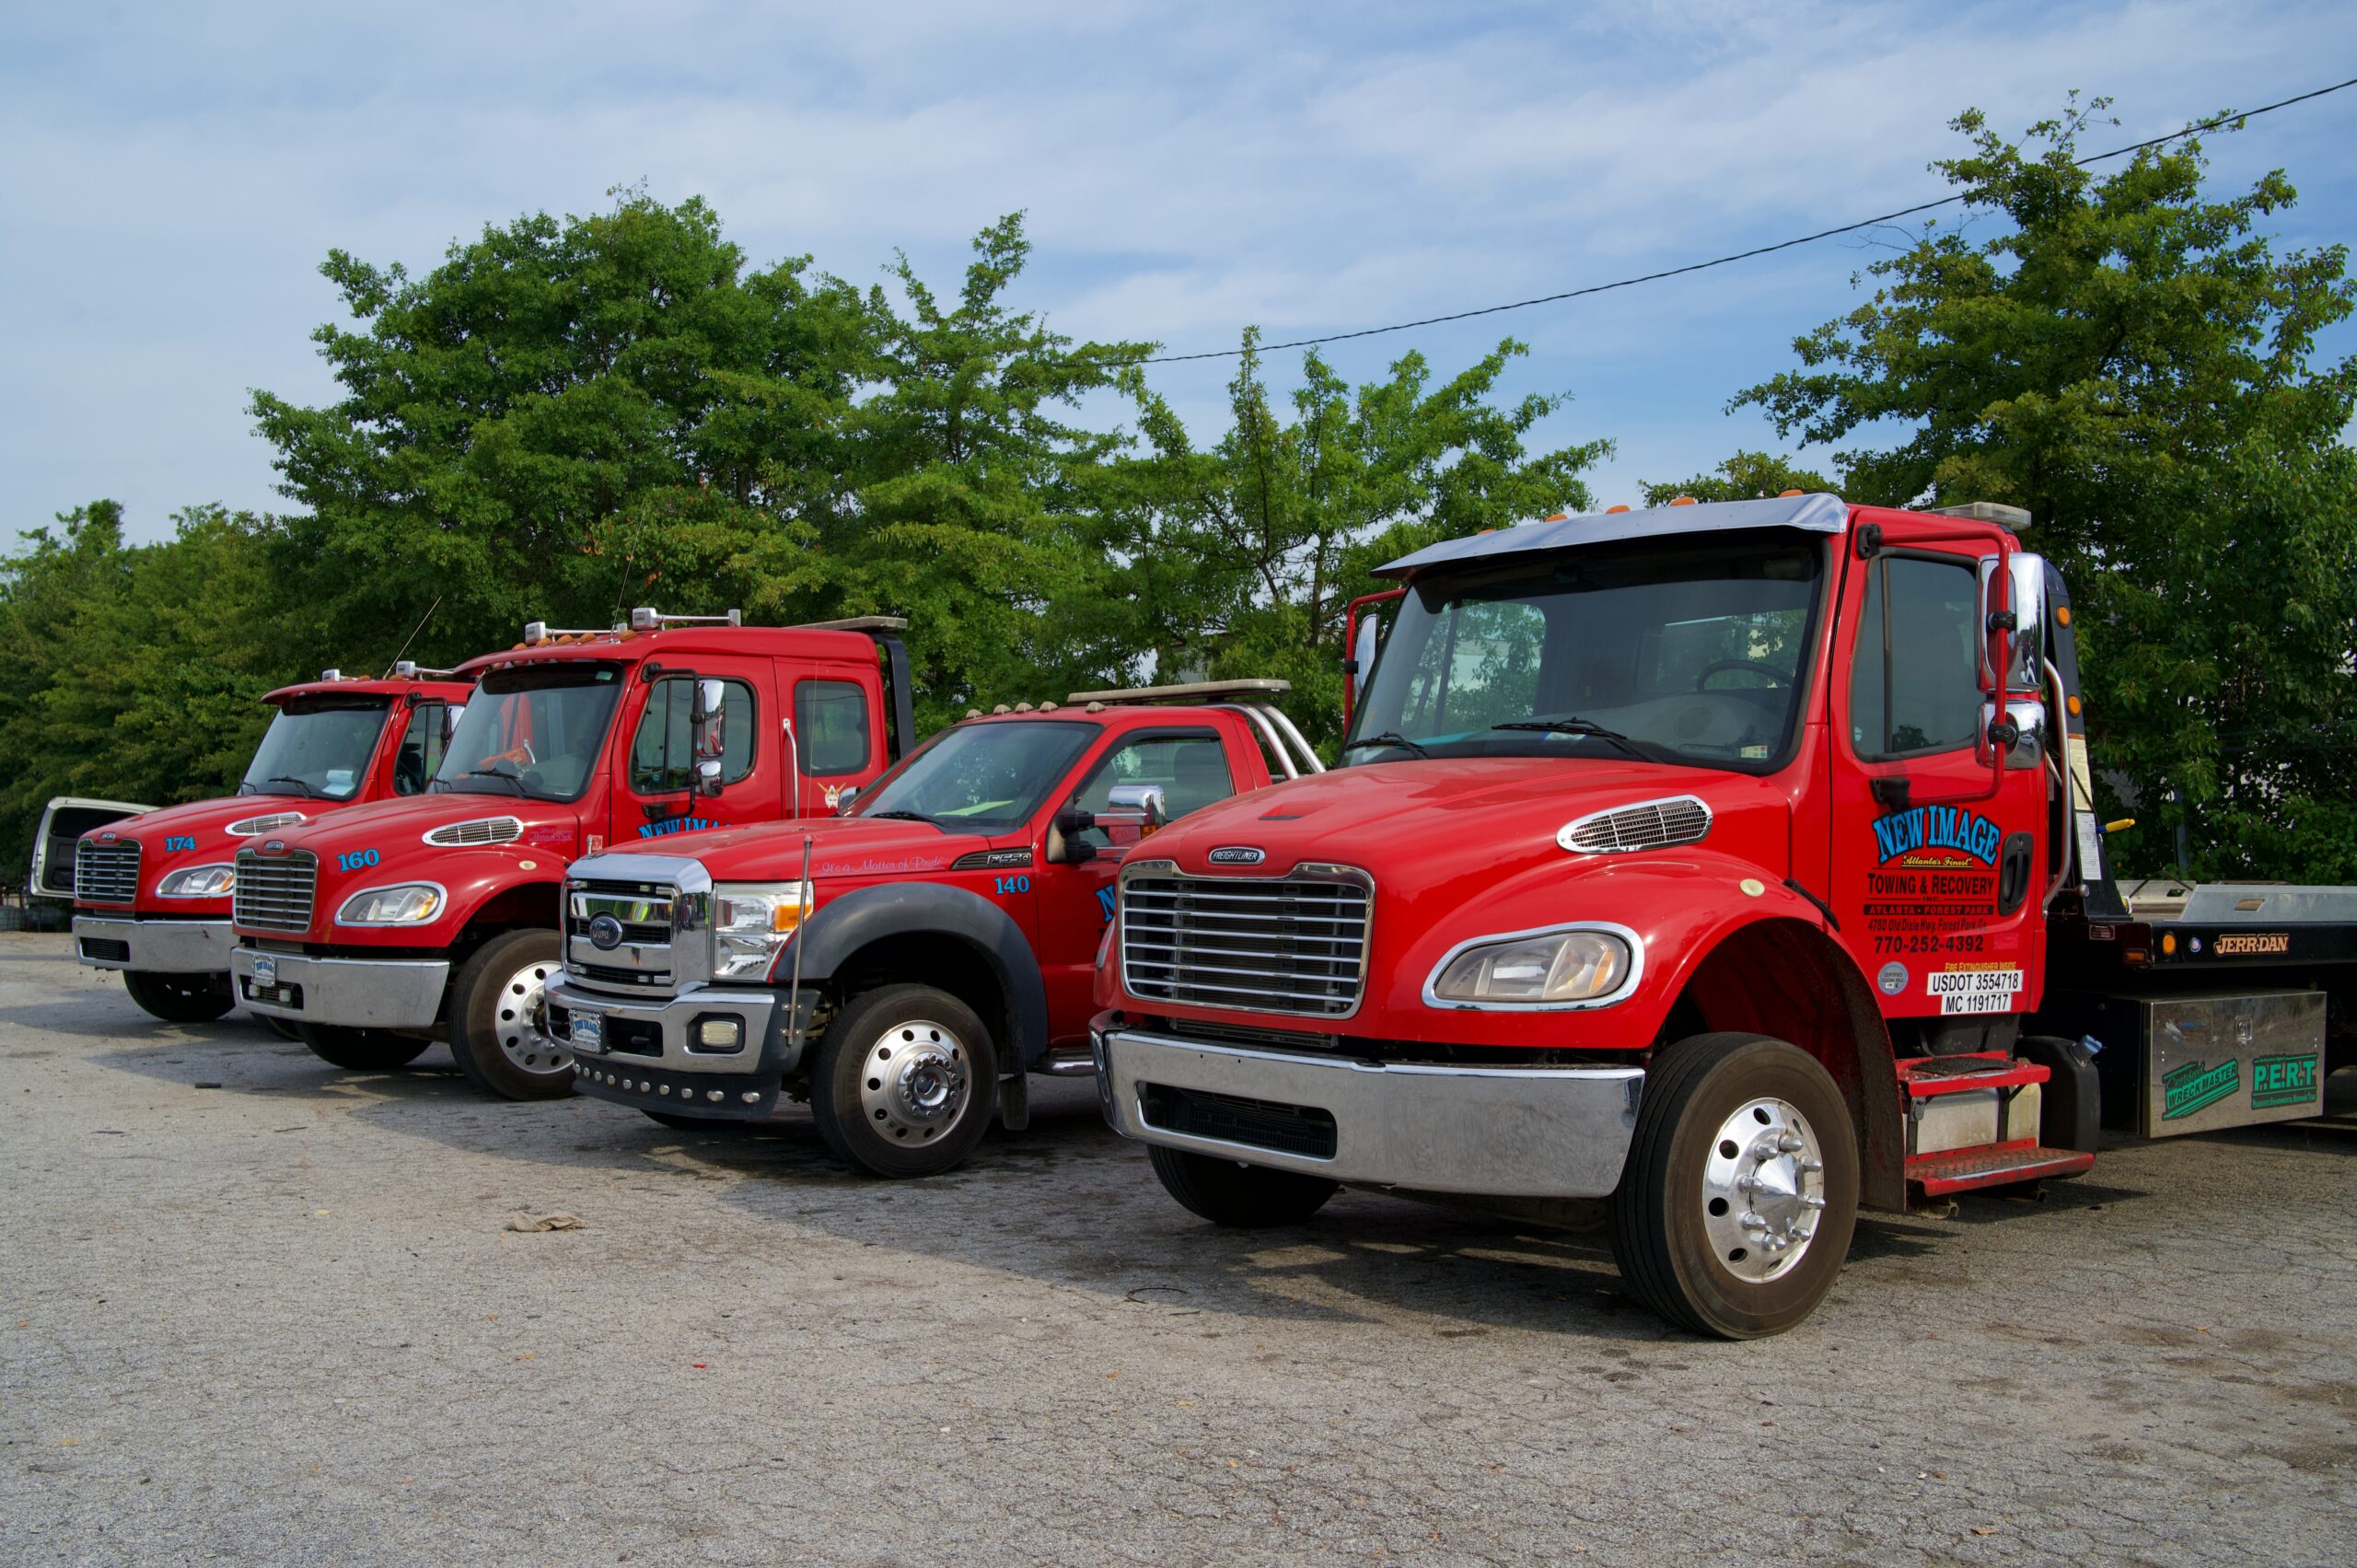 Affordable Towing Solutions: Finding Cheap Tow Services